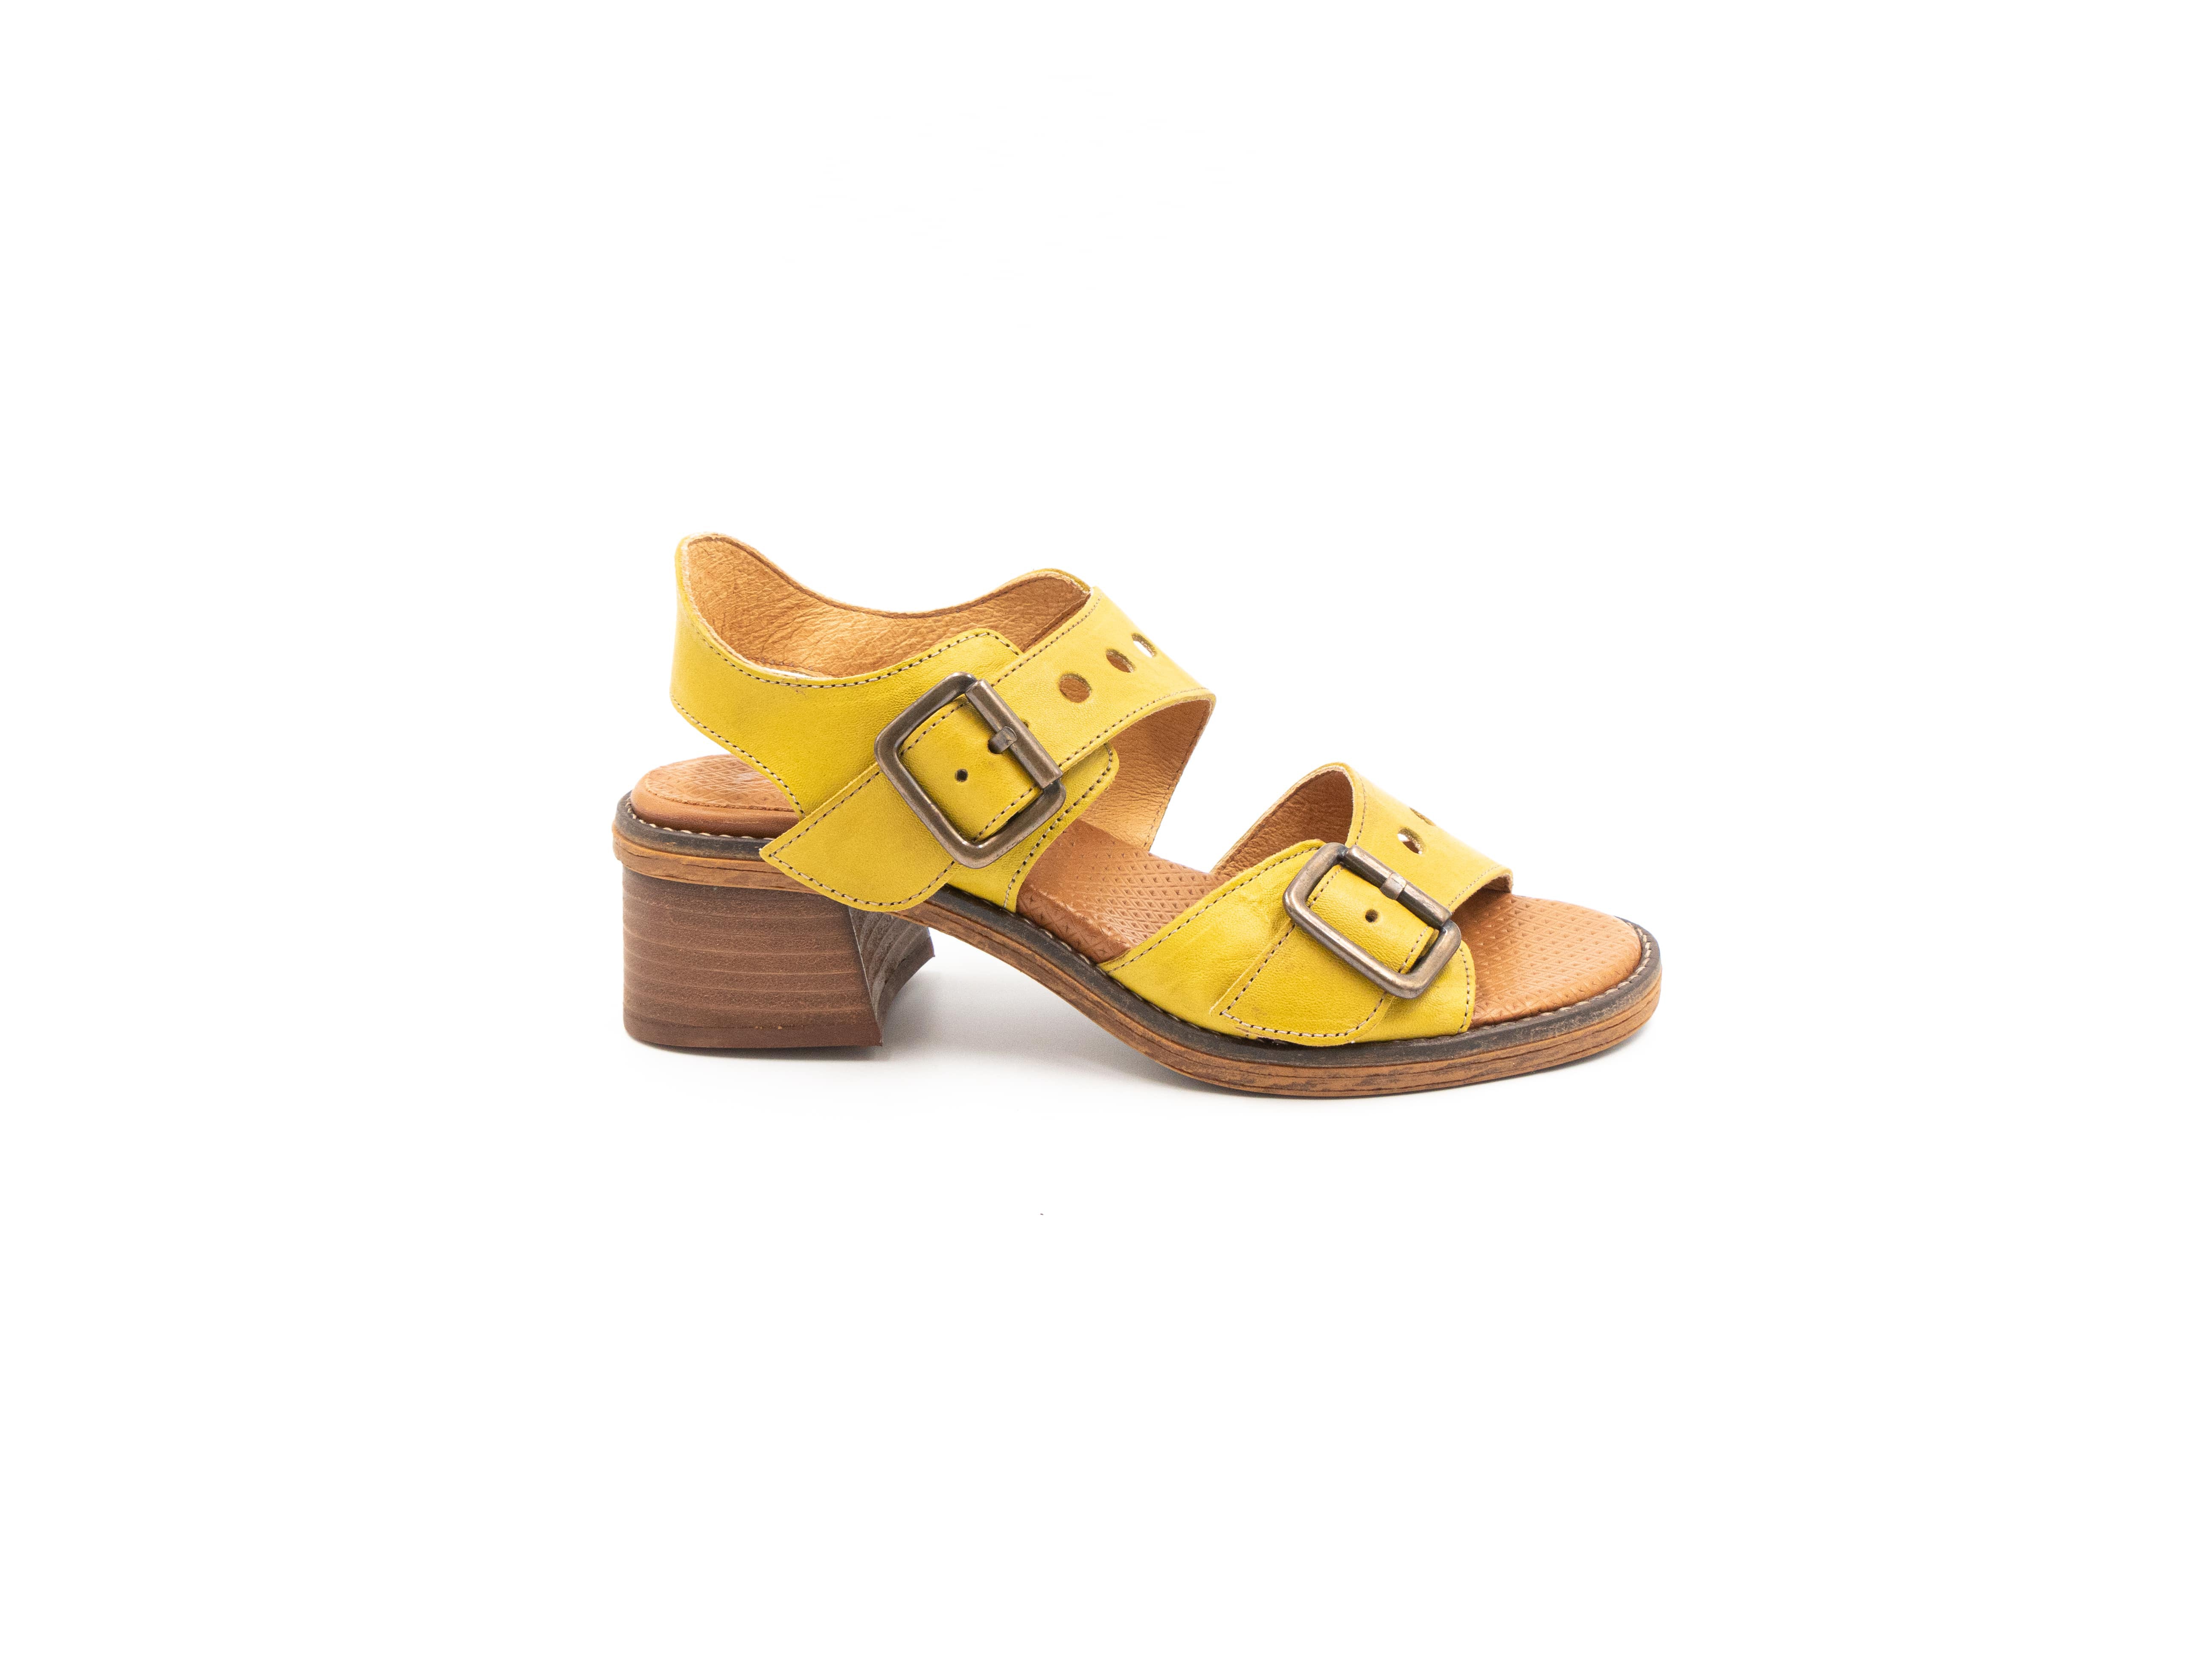 Sandals with small heels in lemon colour.